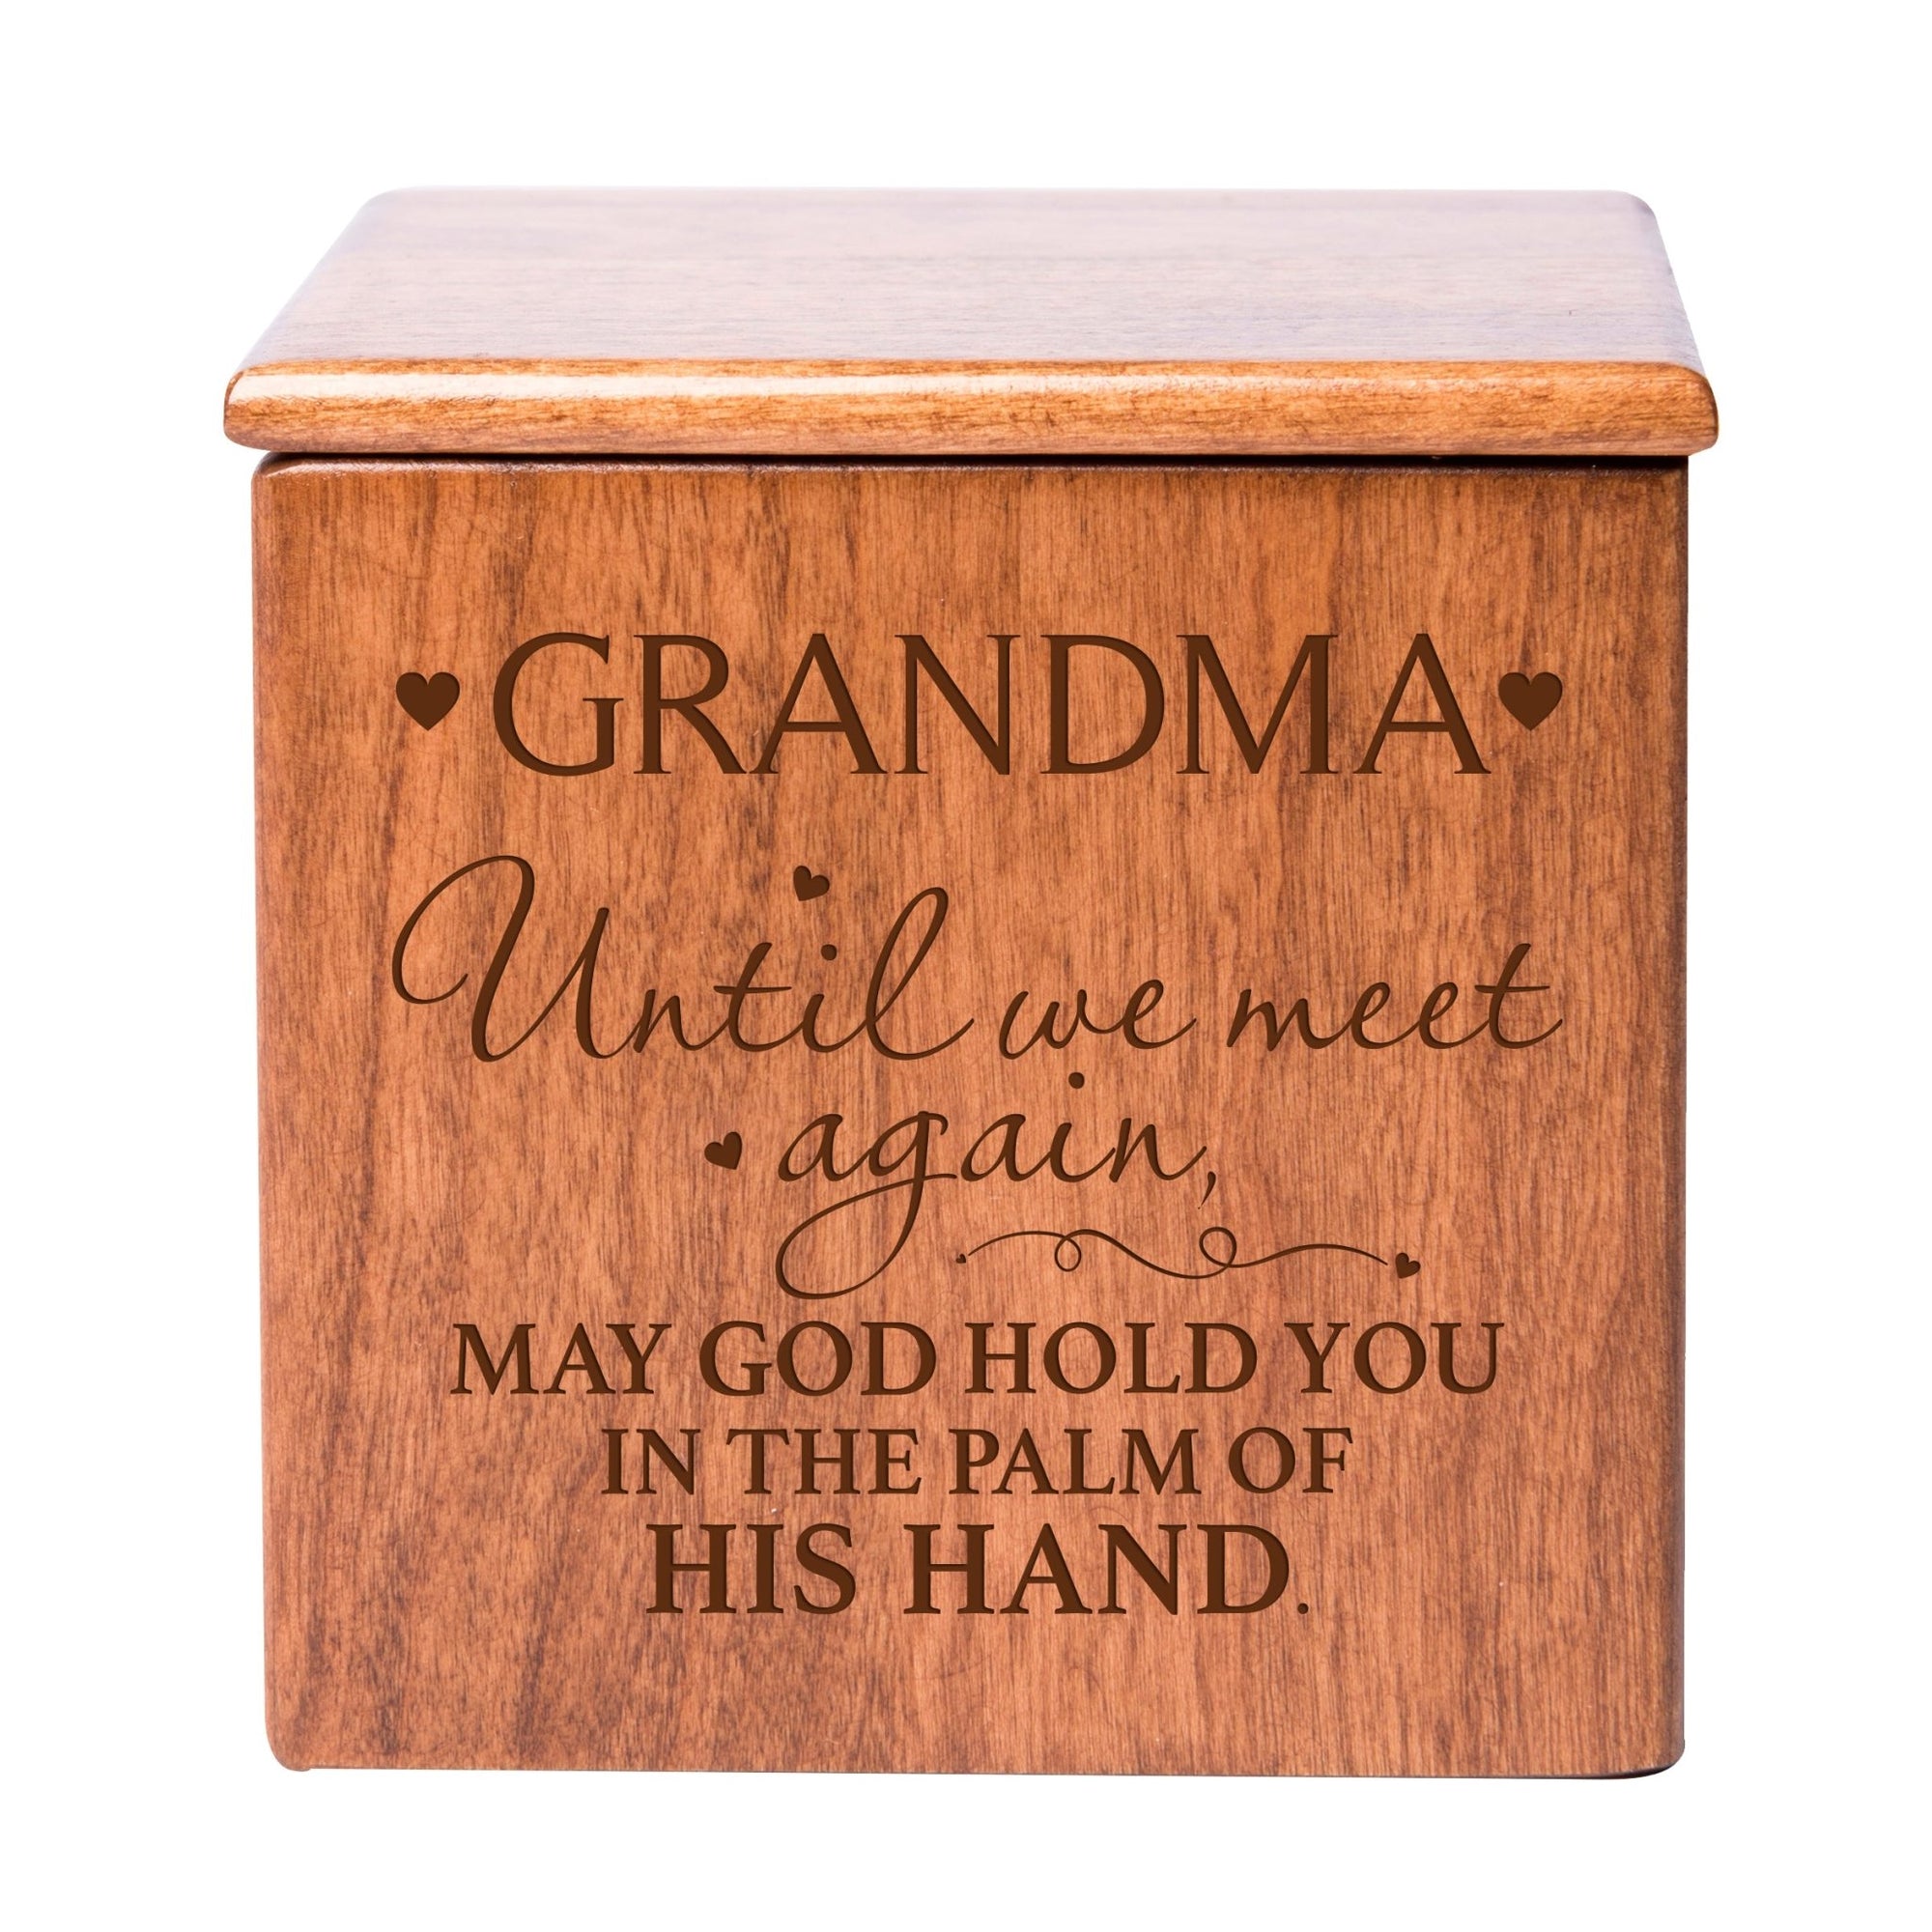 Modern Inspirational Memorial Wooden Cremation Urn Box 4.5x4.5in Holds 49 Cu Inches Of Human Ashes (Until We Meet Again Grandma) Funeral and Commemorative Keepsake - LifeSong Milestones